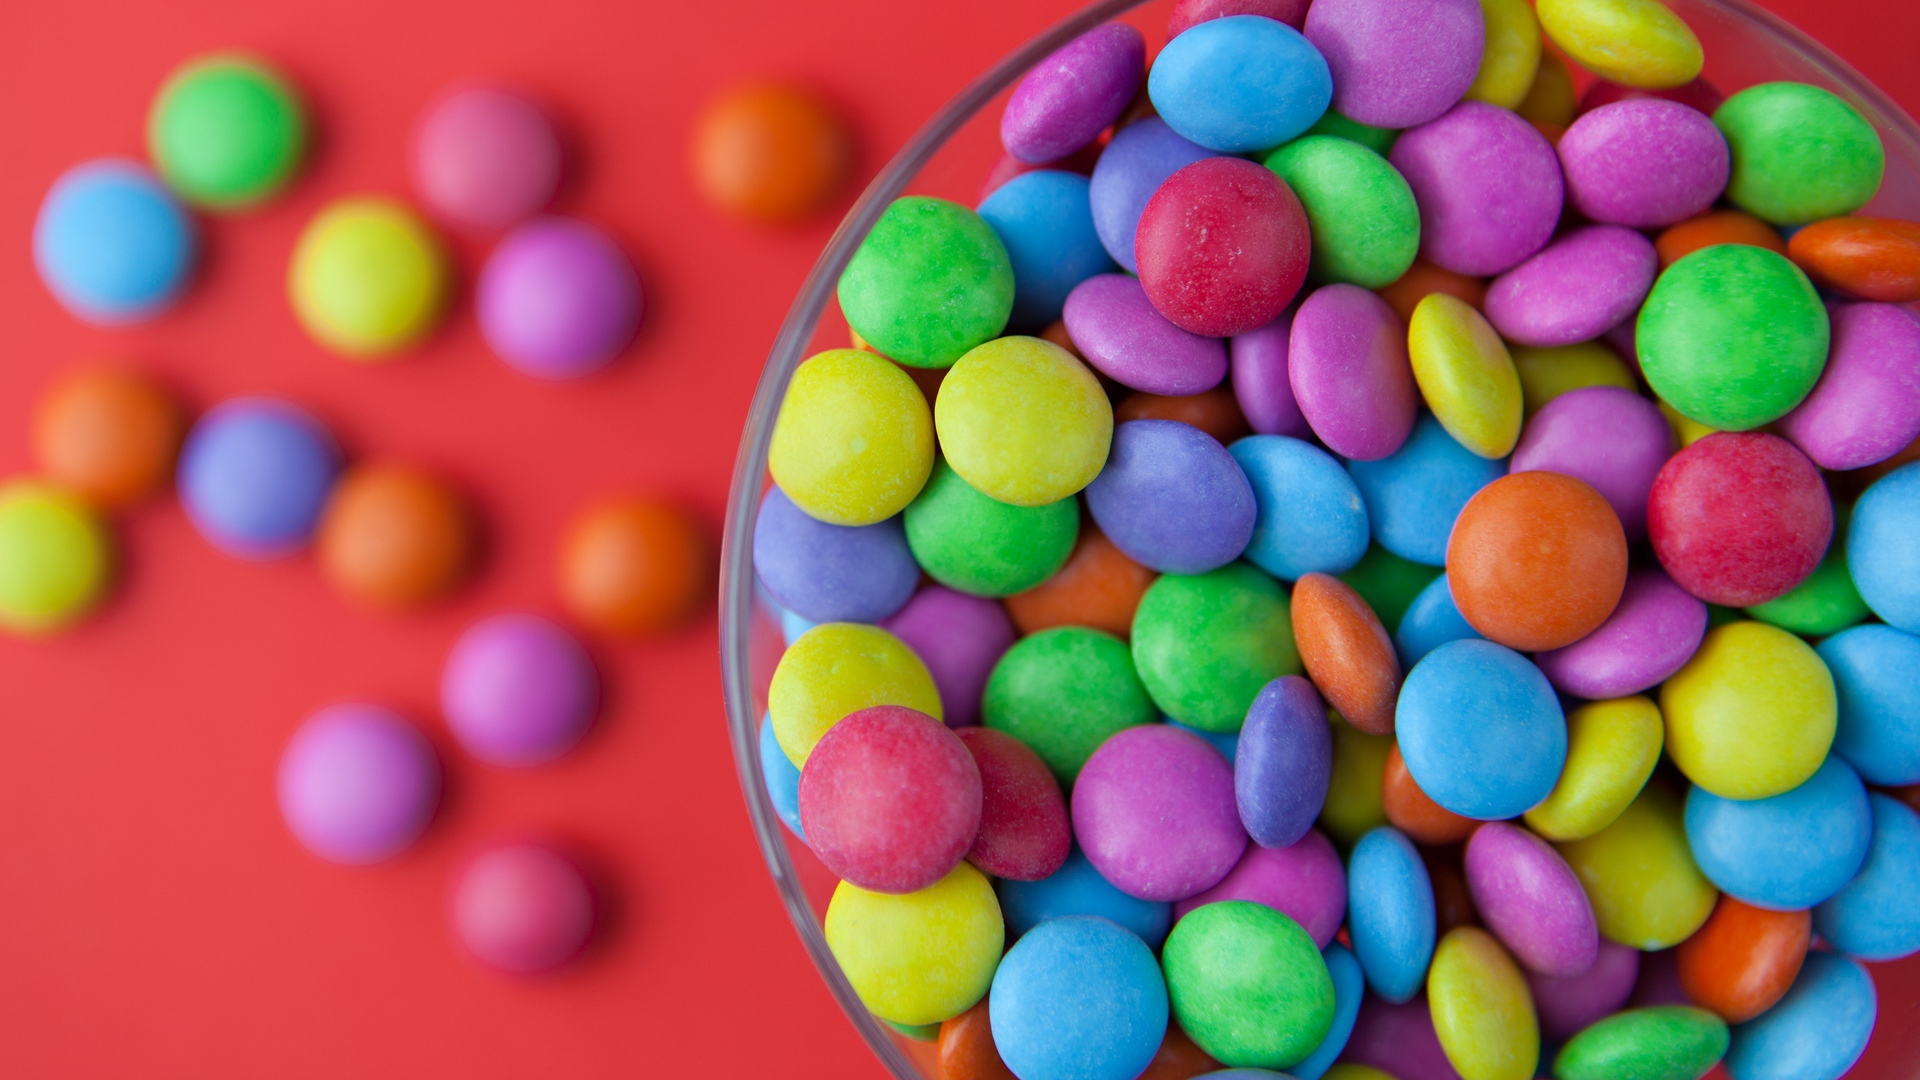 Bowl Of Colored Candy - HD Wallpaper 